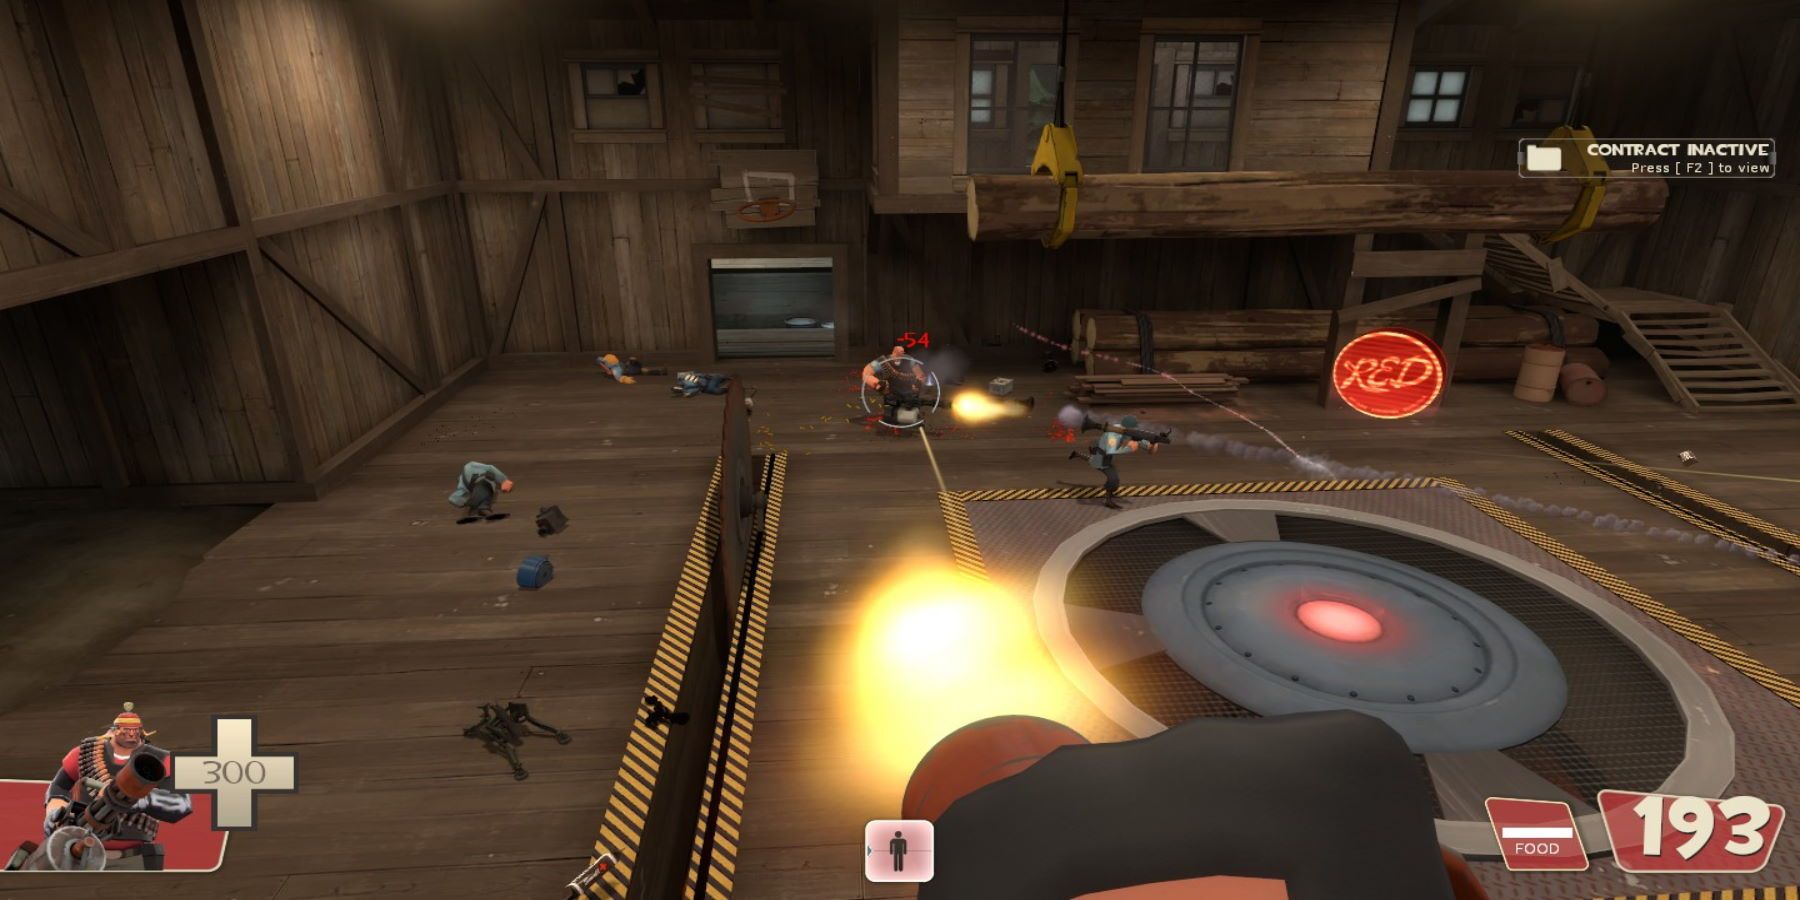 A Heavy Weapons Guy firing at another Heavy with a minigun near a RED-controlled point in a building made of wood. A BLU soldier is nearby, along with metal and a few dead enemies